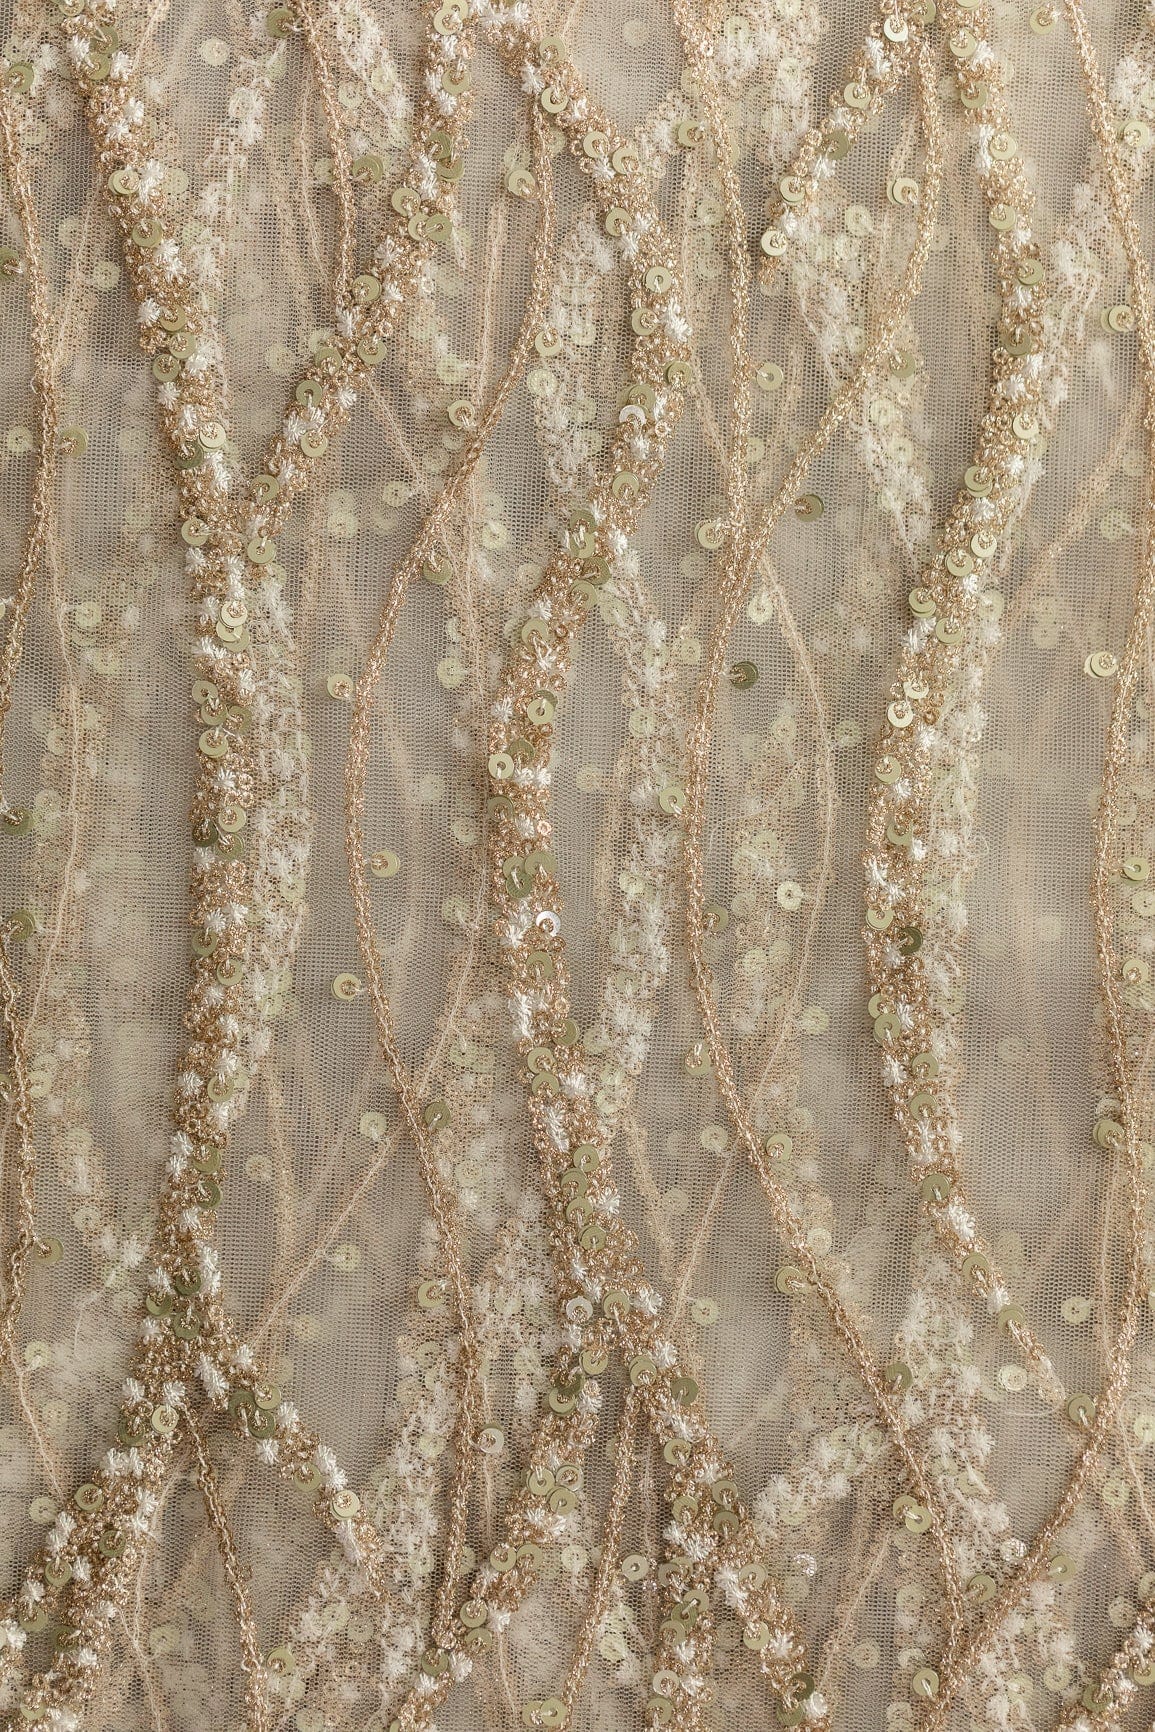 Gold Sequins With White Thread Embroidery On White Soft Net Fabric - doeraa